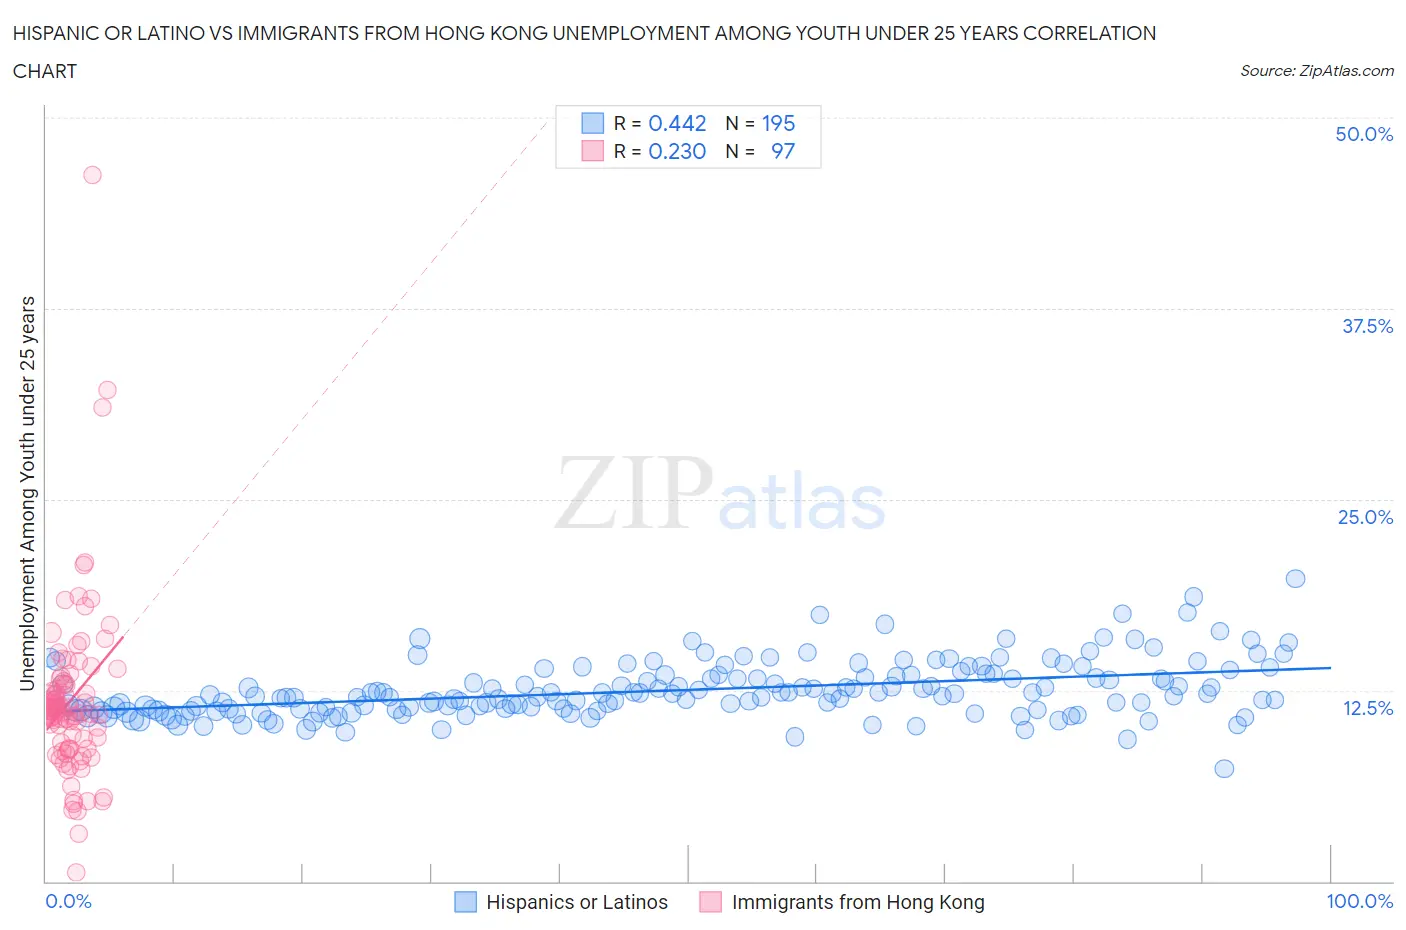 Hispanic or Latino vs Immigrants from Hong Kong Unemployment Among Youth under 25 years